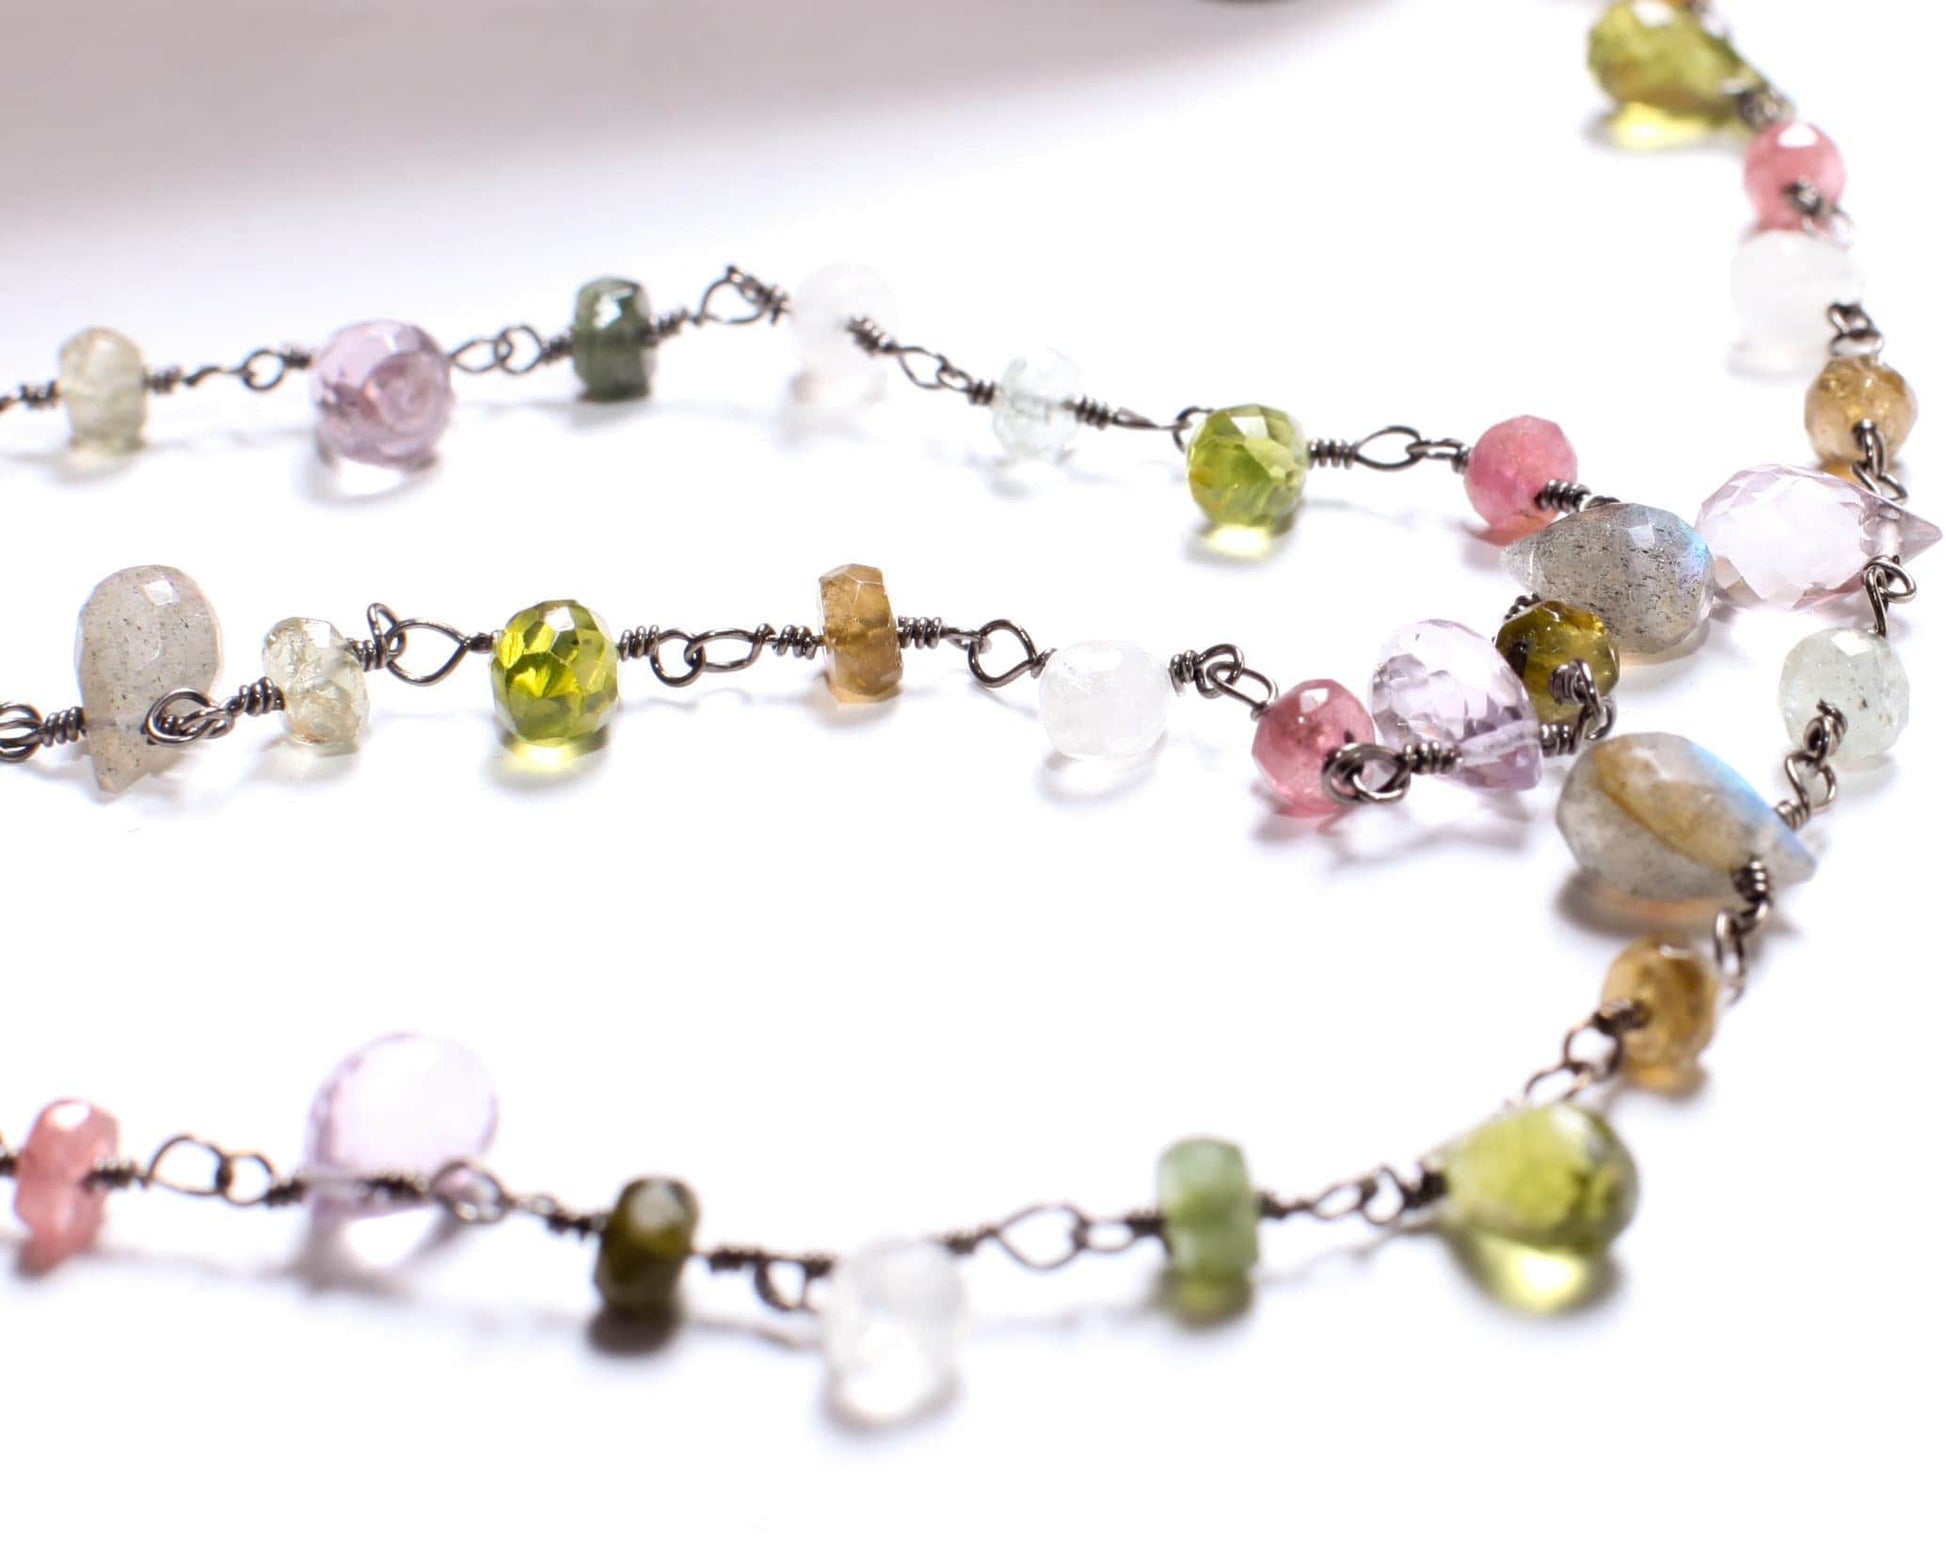 Multi Gemstone Faceted Briolette Rondelle Wire Wrapped Oxidized Silver Necklace, Peridot, Labradorite, Moonstone, Tourmaline, Pink Amethyst